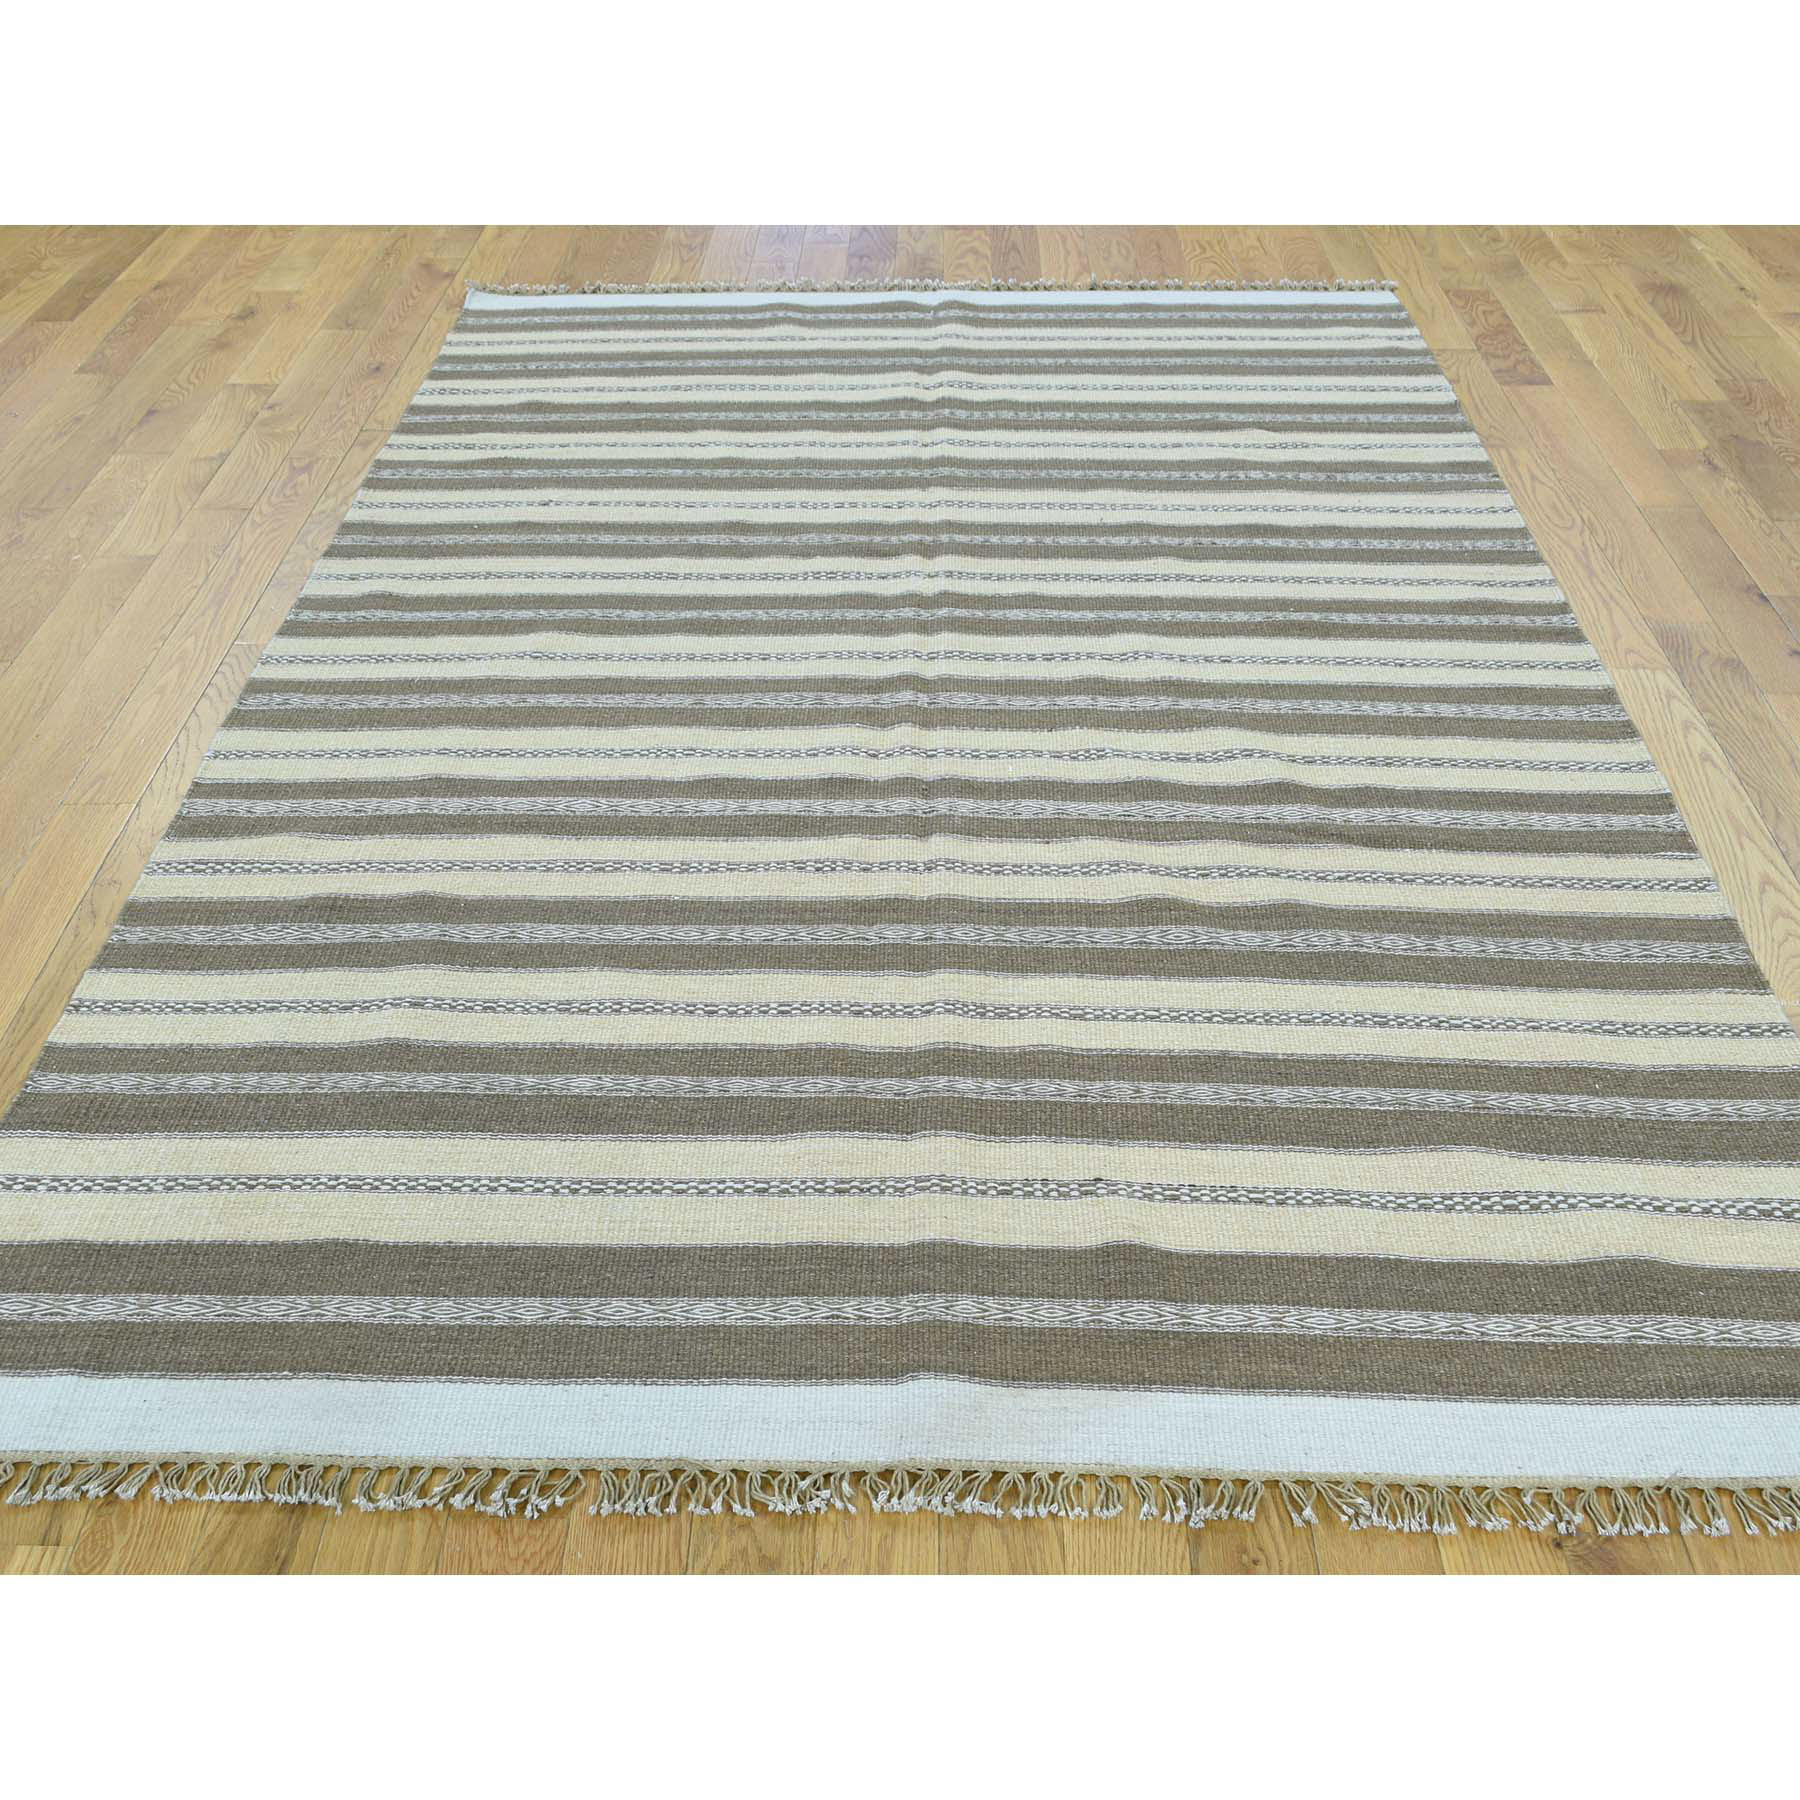 5-x8-1  On Clearance Hand-Woven Striped Flat Weave Kilim Pure Wool Oriental Rug 